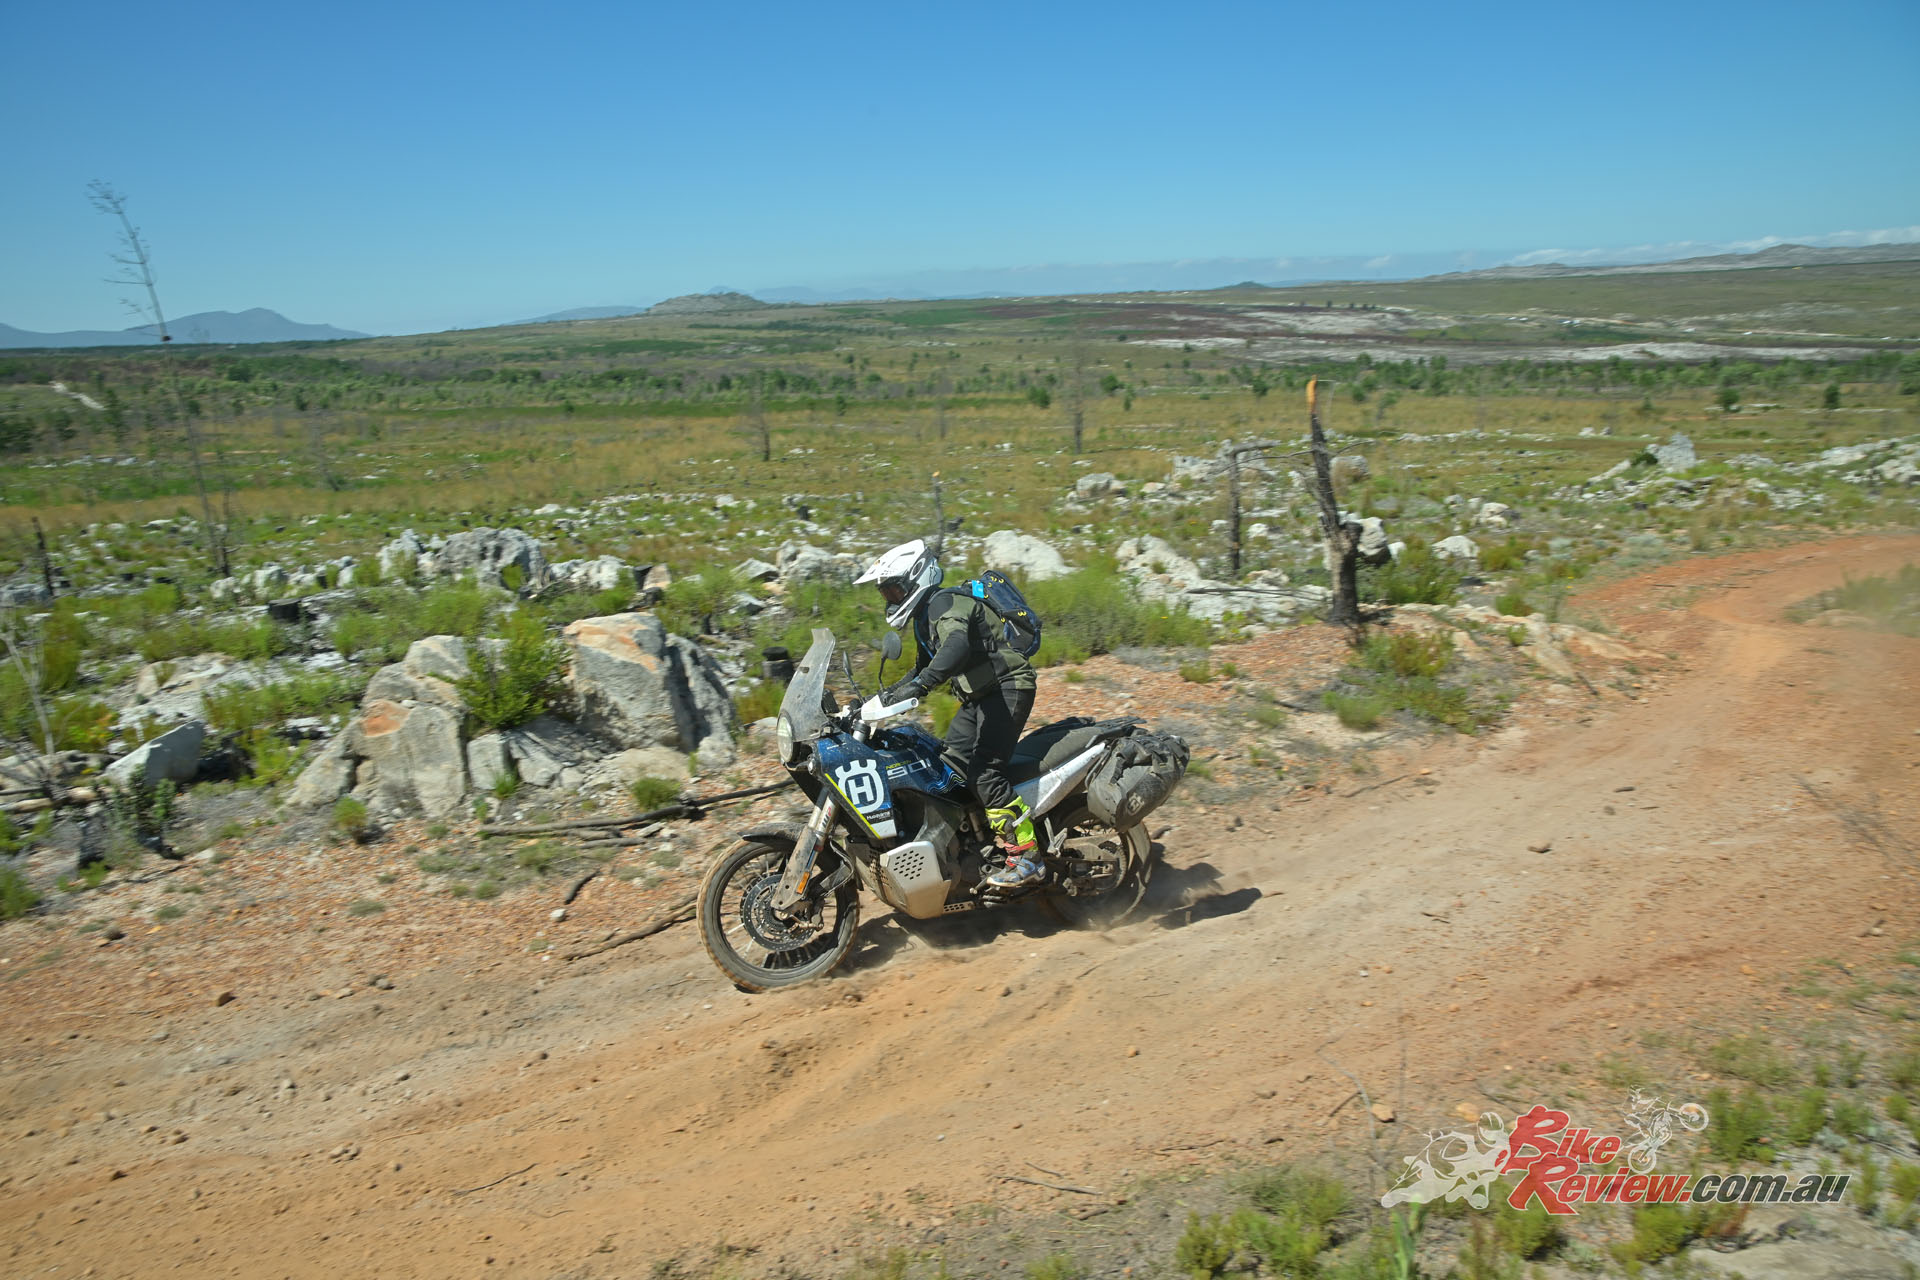 "Husqvarna also treated us to some of the most challenging off-road riding I’ve experienced on a road bike launch. Clearly, they were confident in their product as we were invited to take on everything from mud, water, rocks and rubble to cliff-like ascents..."